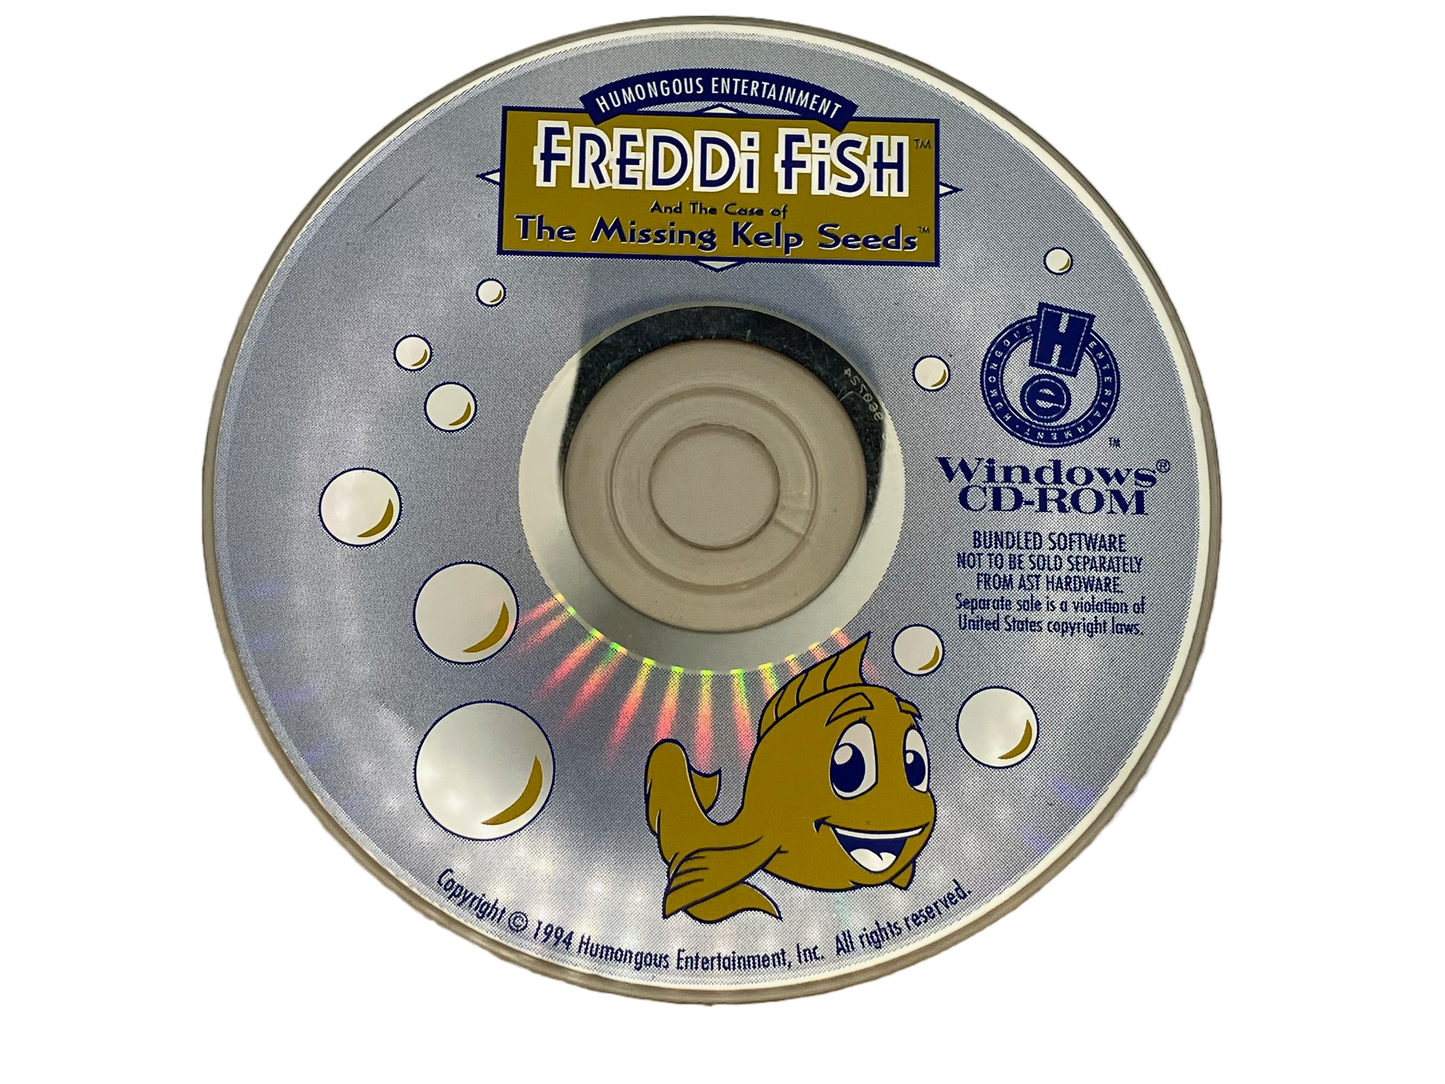 Freddi Fish and The Case of the Missing Kelp Seeds PC CD Rom Game Disc Only.